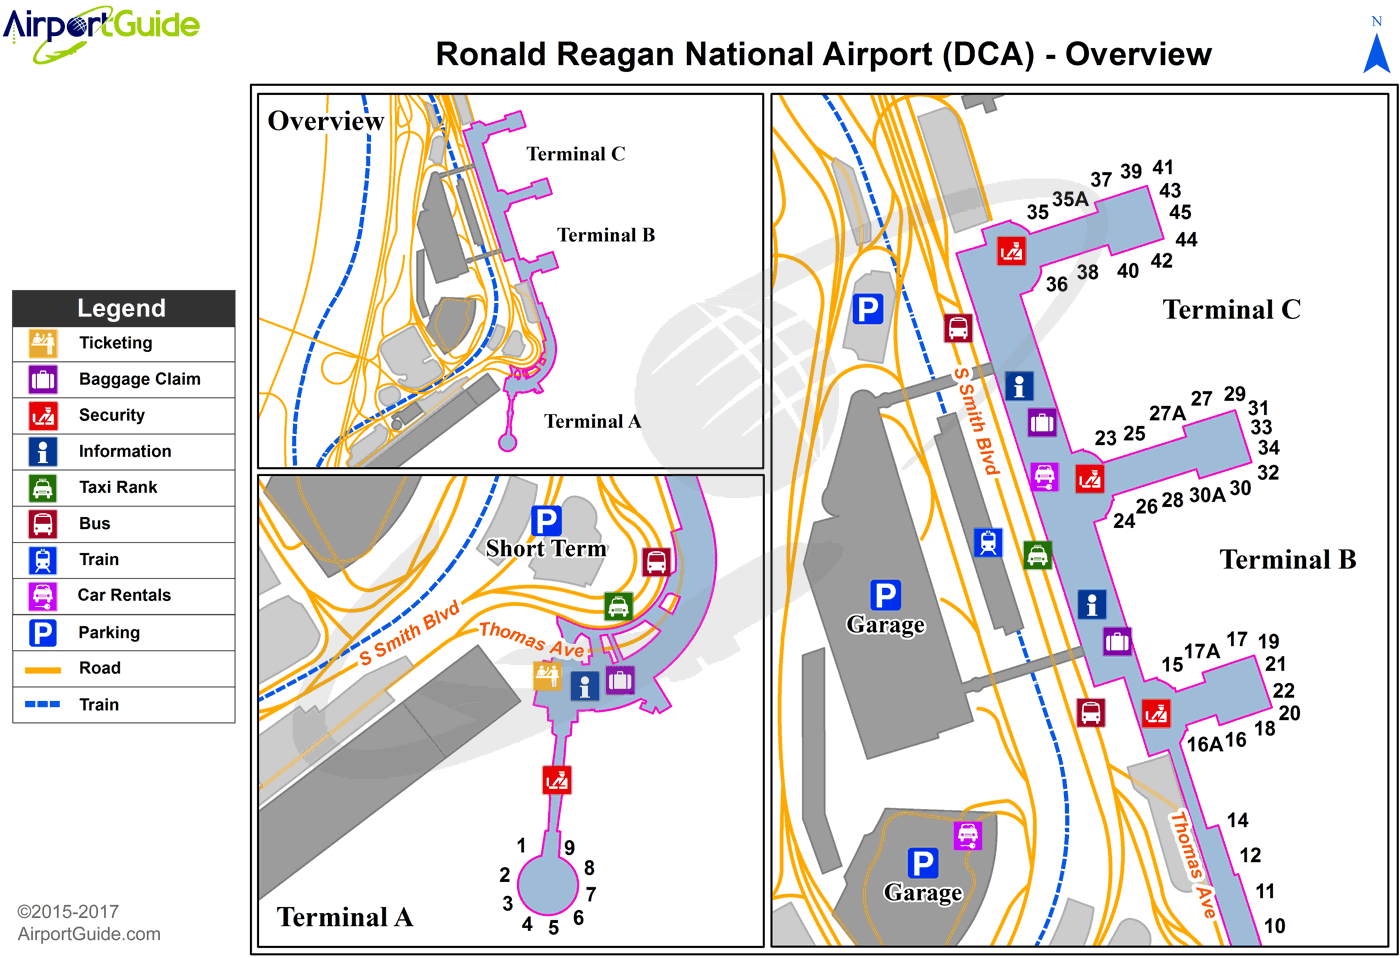 DCA Overview Map 